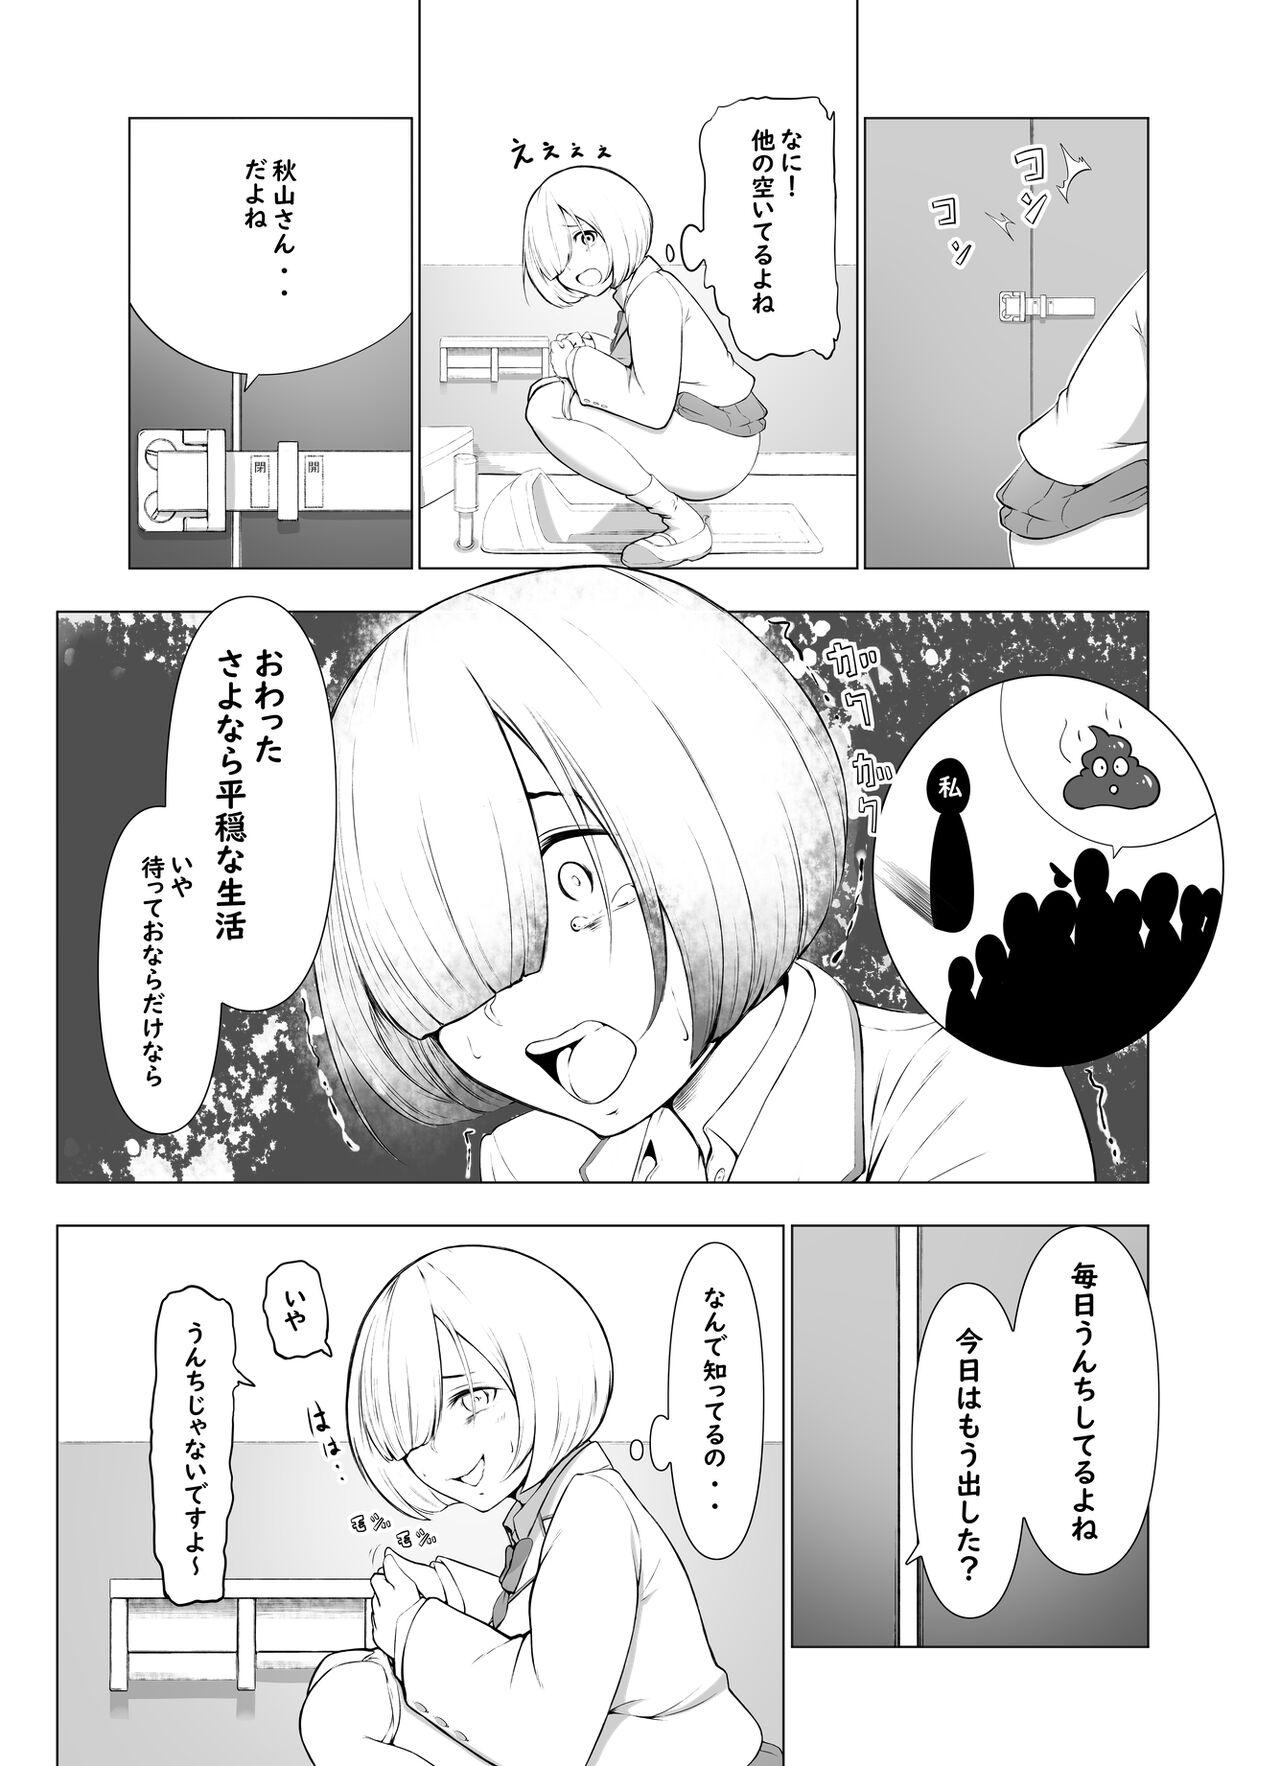 Orgame 【脱糞漫画】トイレの音【８P】 Eat - Page 4